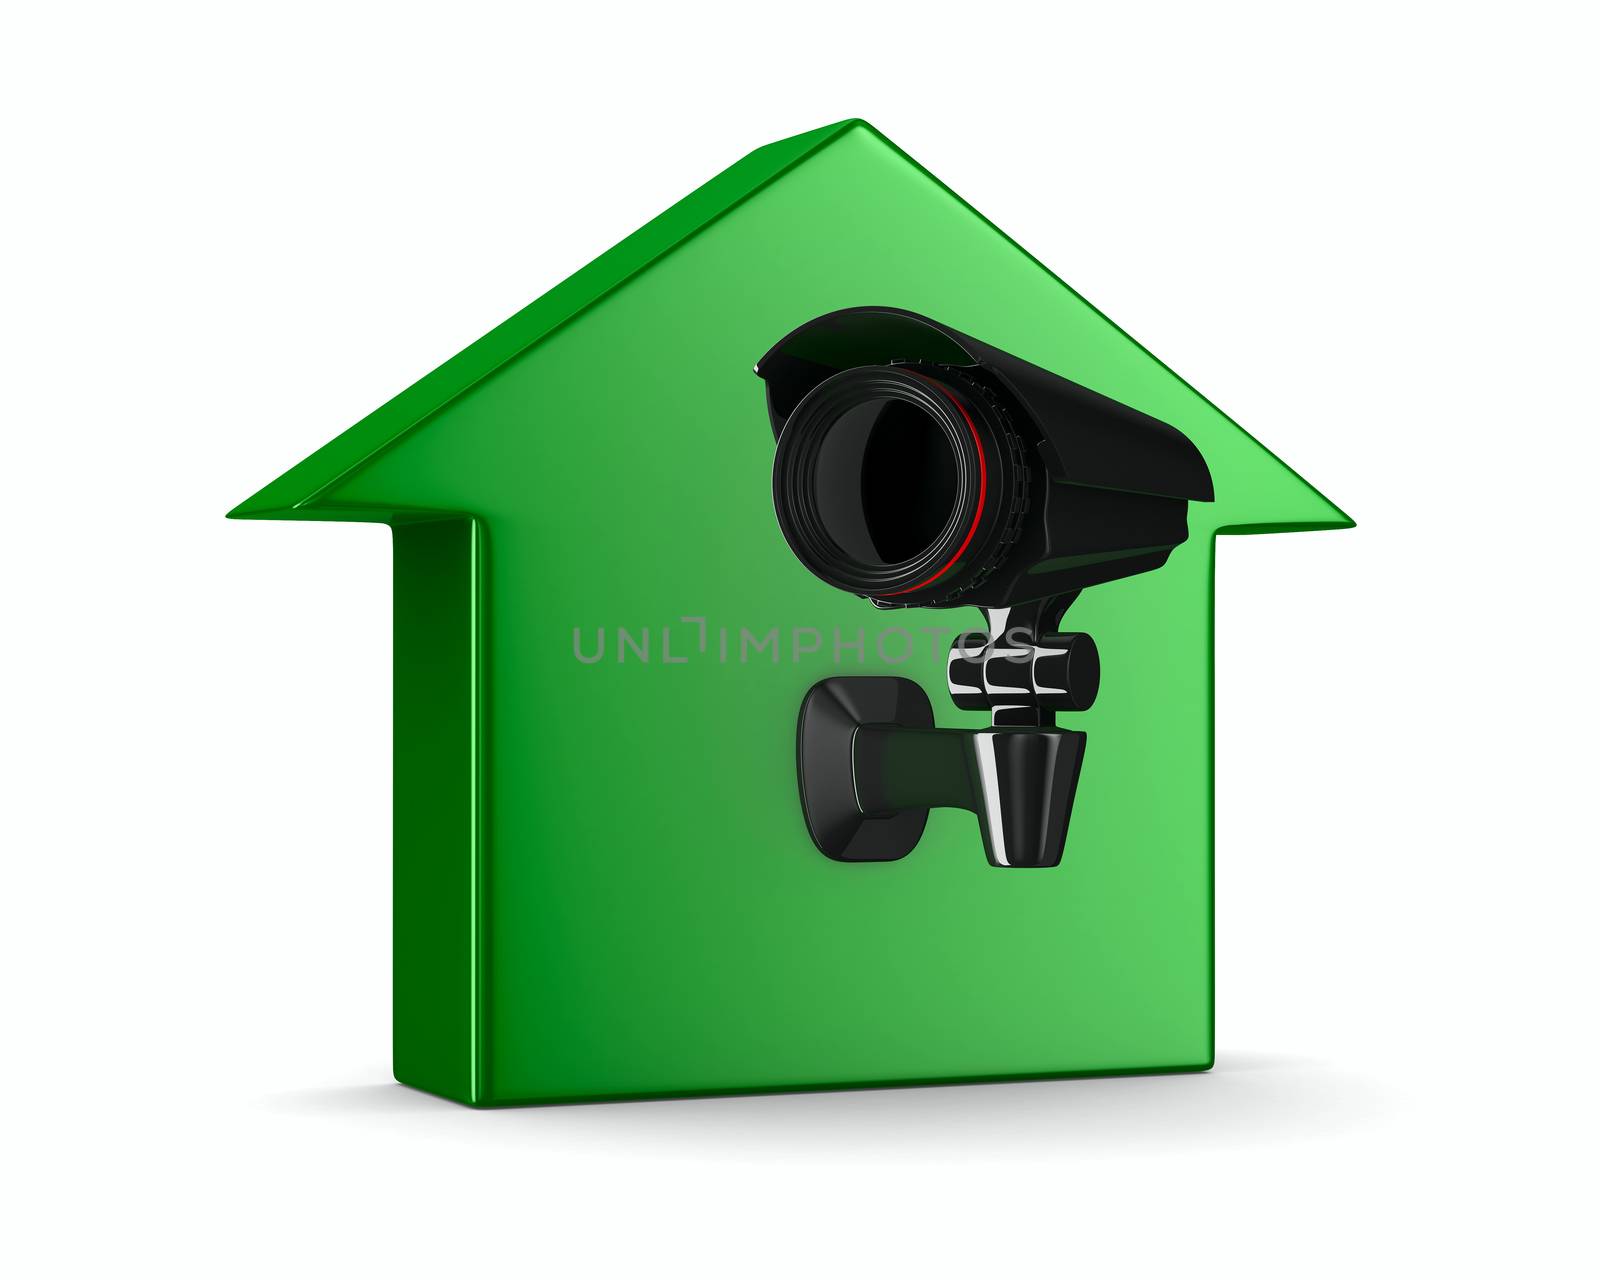 security camera on house. Isolated 3D image